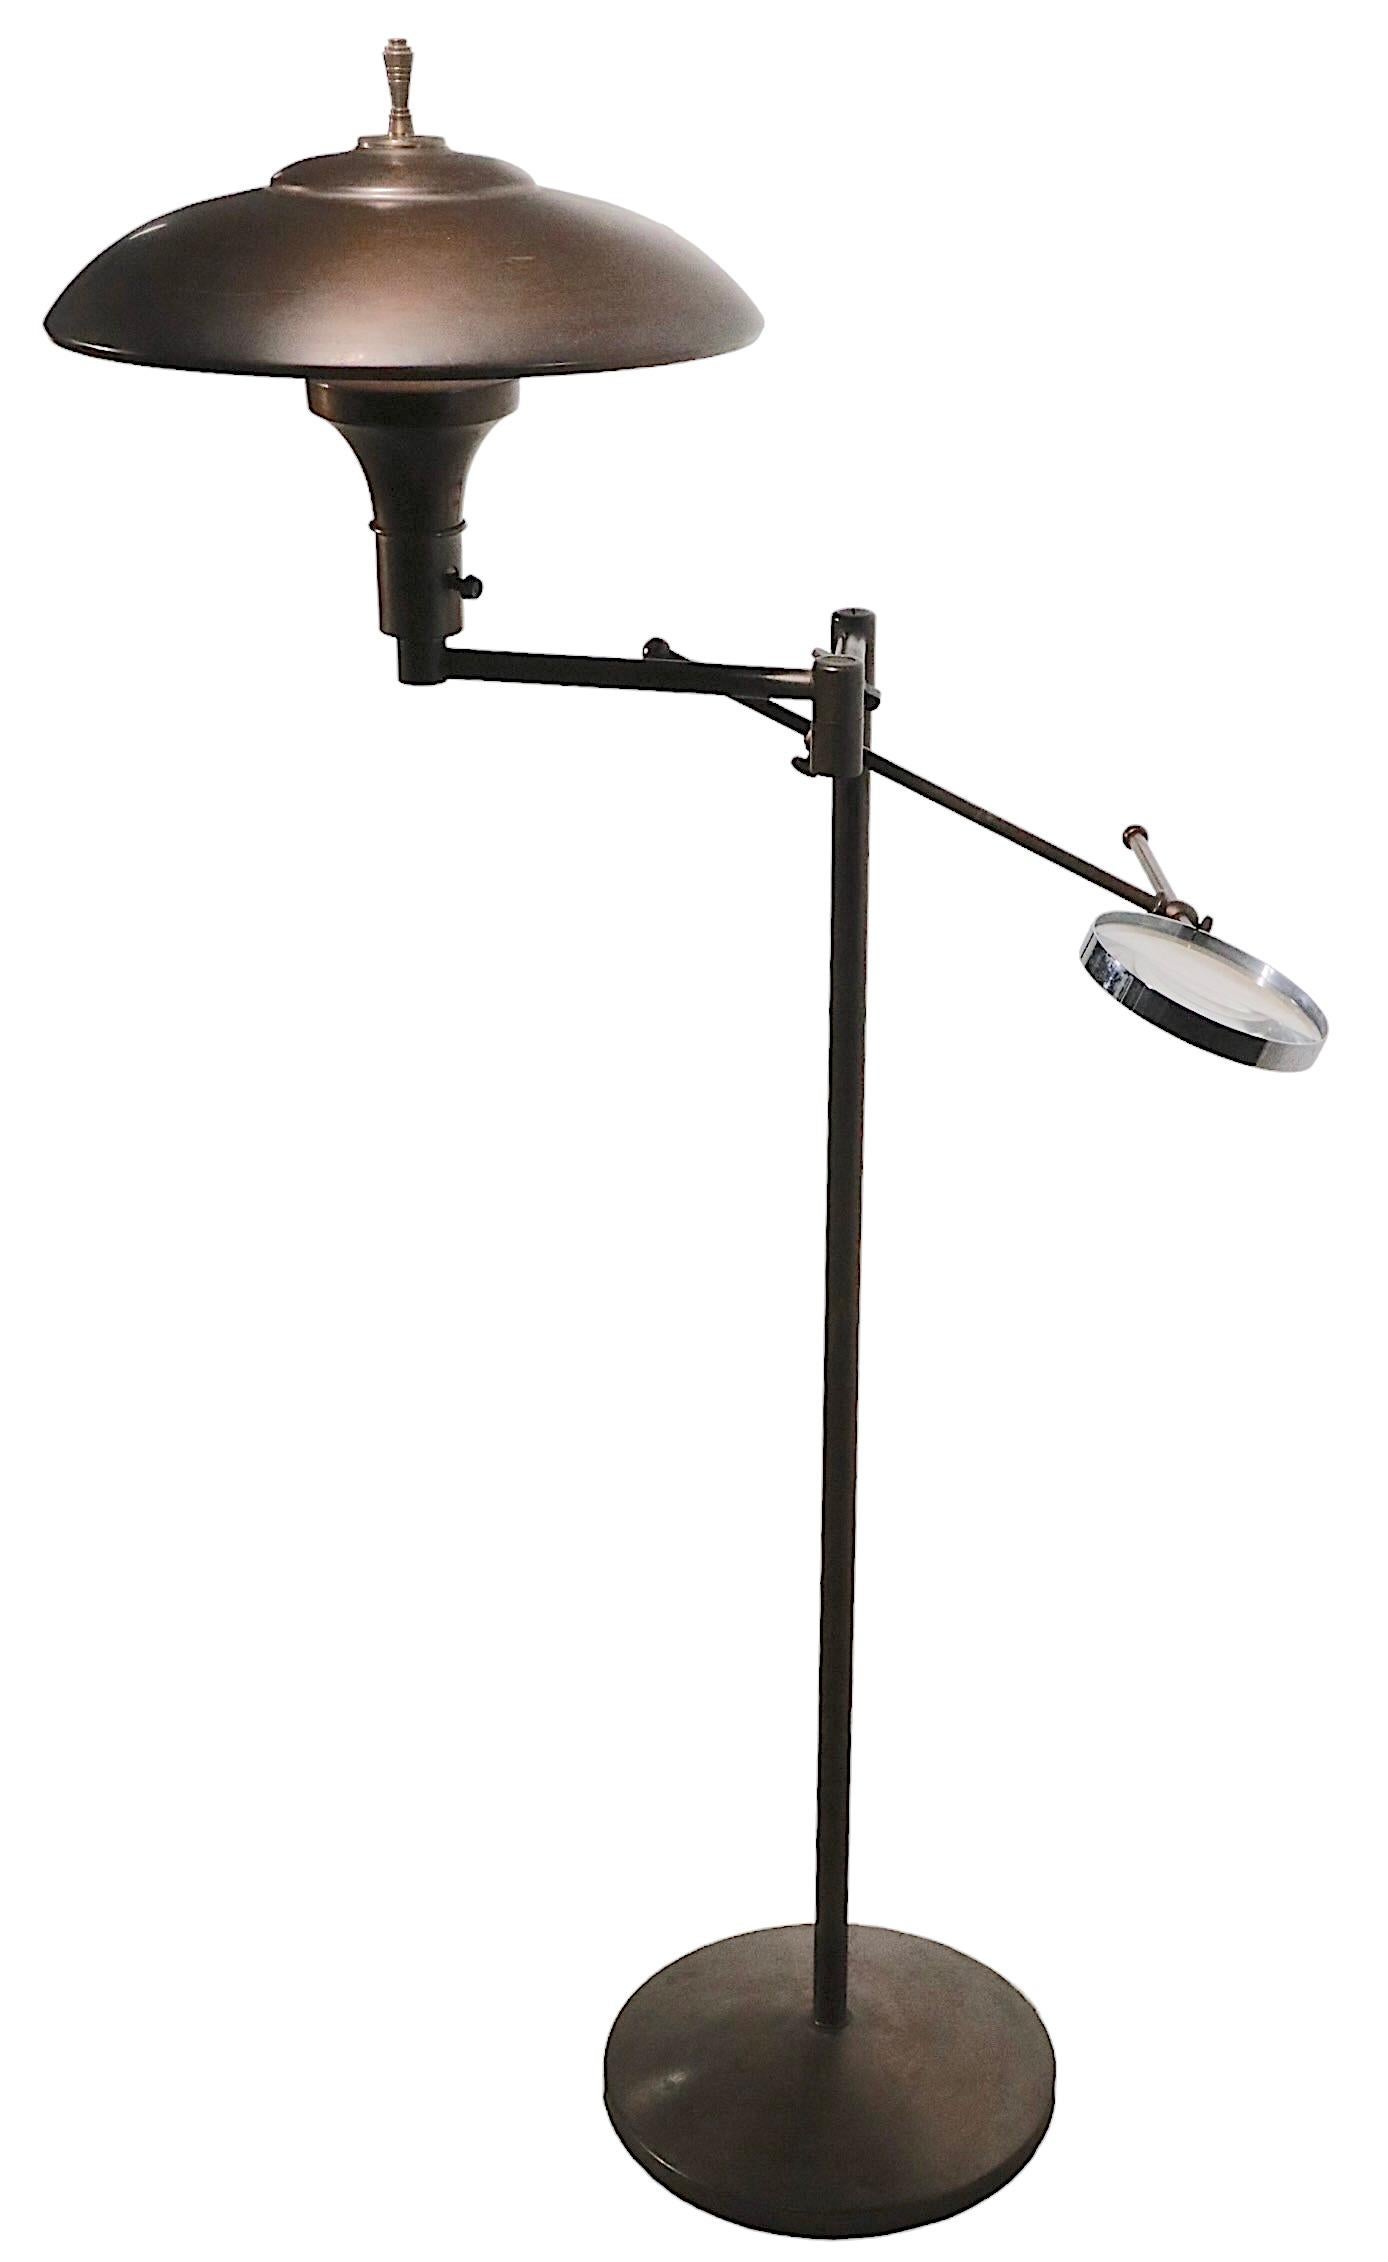 Adjustable Floor Lamp with Magnifying Glass, Faries Lamp Co. circa 1920-1940 For Sale 12